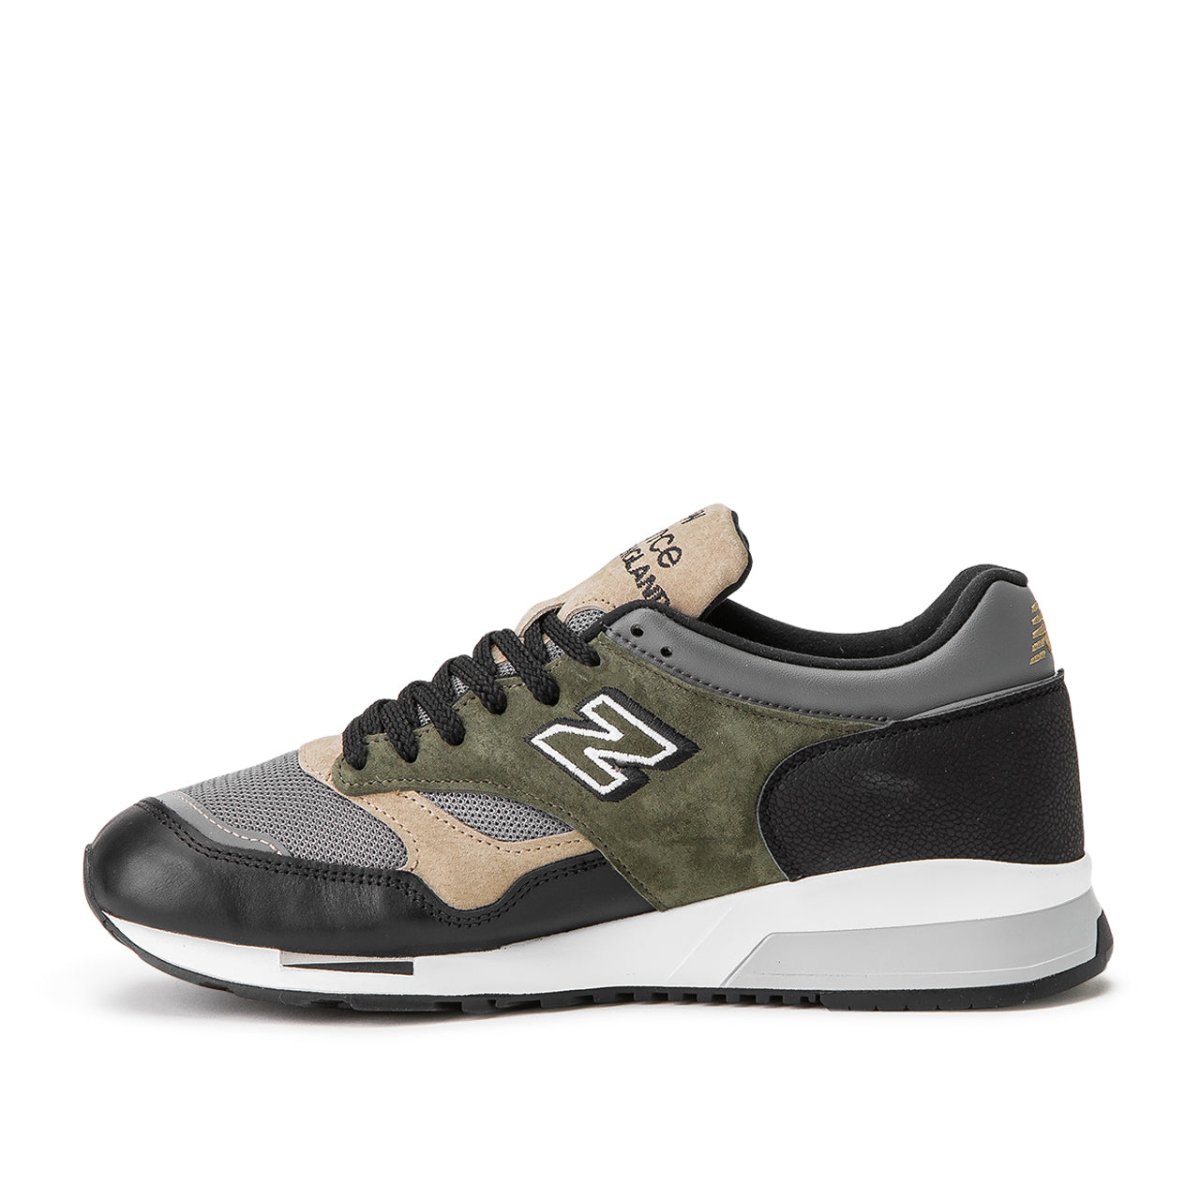 New Balance M1500 FDS 'Made in England' (Schwarz / Olive)  - Allike Store